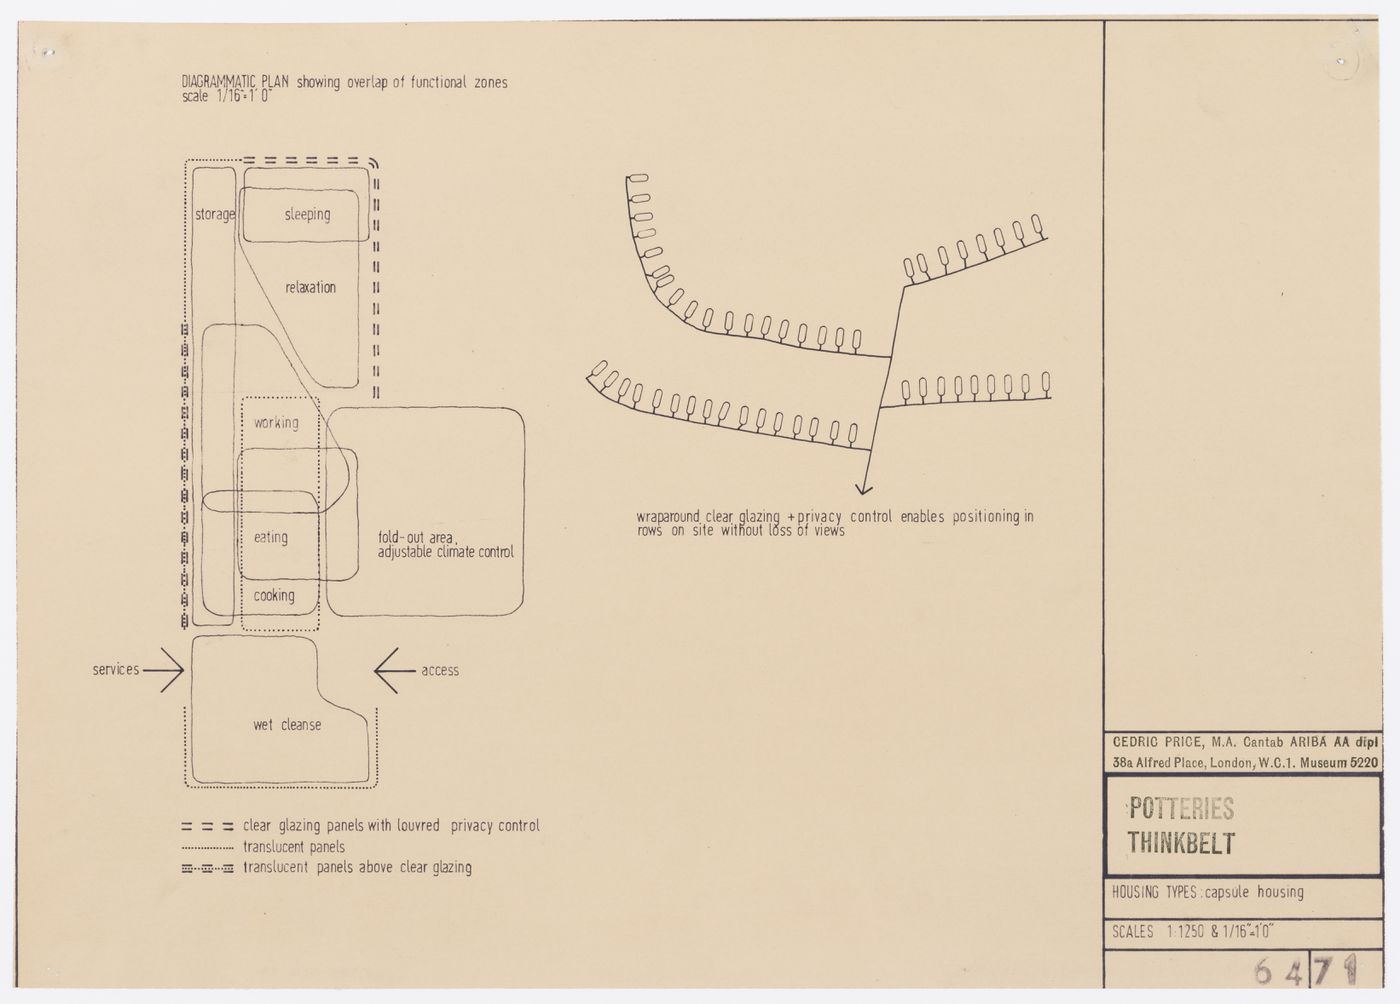 Diagrammatic plan and site plan for capsule housing for Potteries Thinkbelt